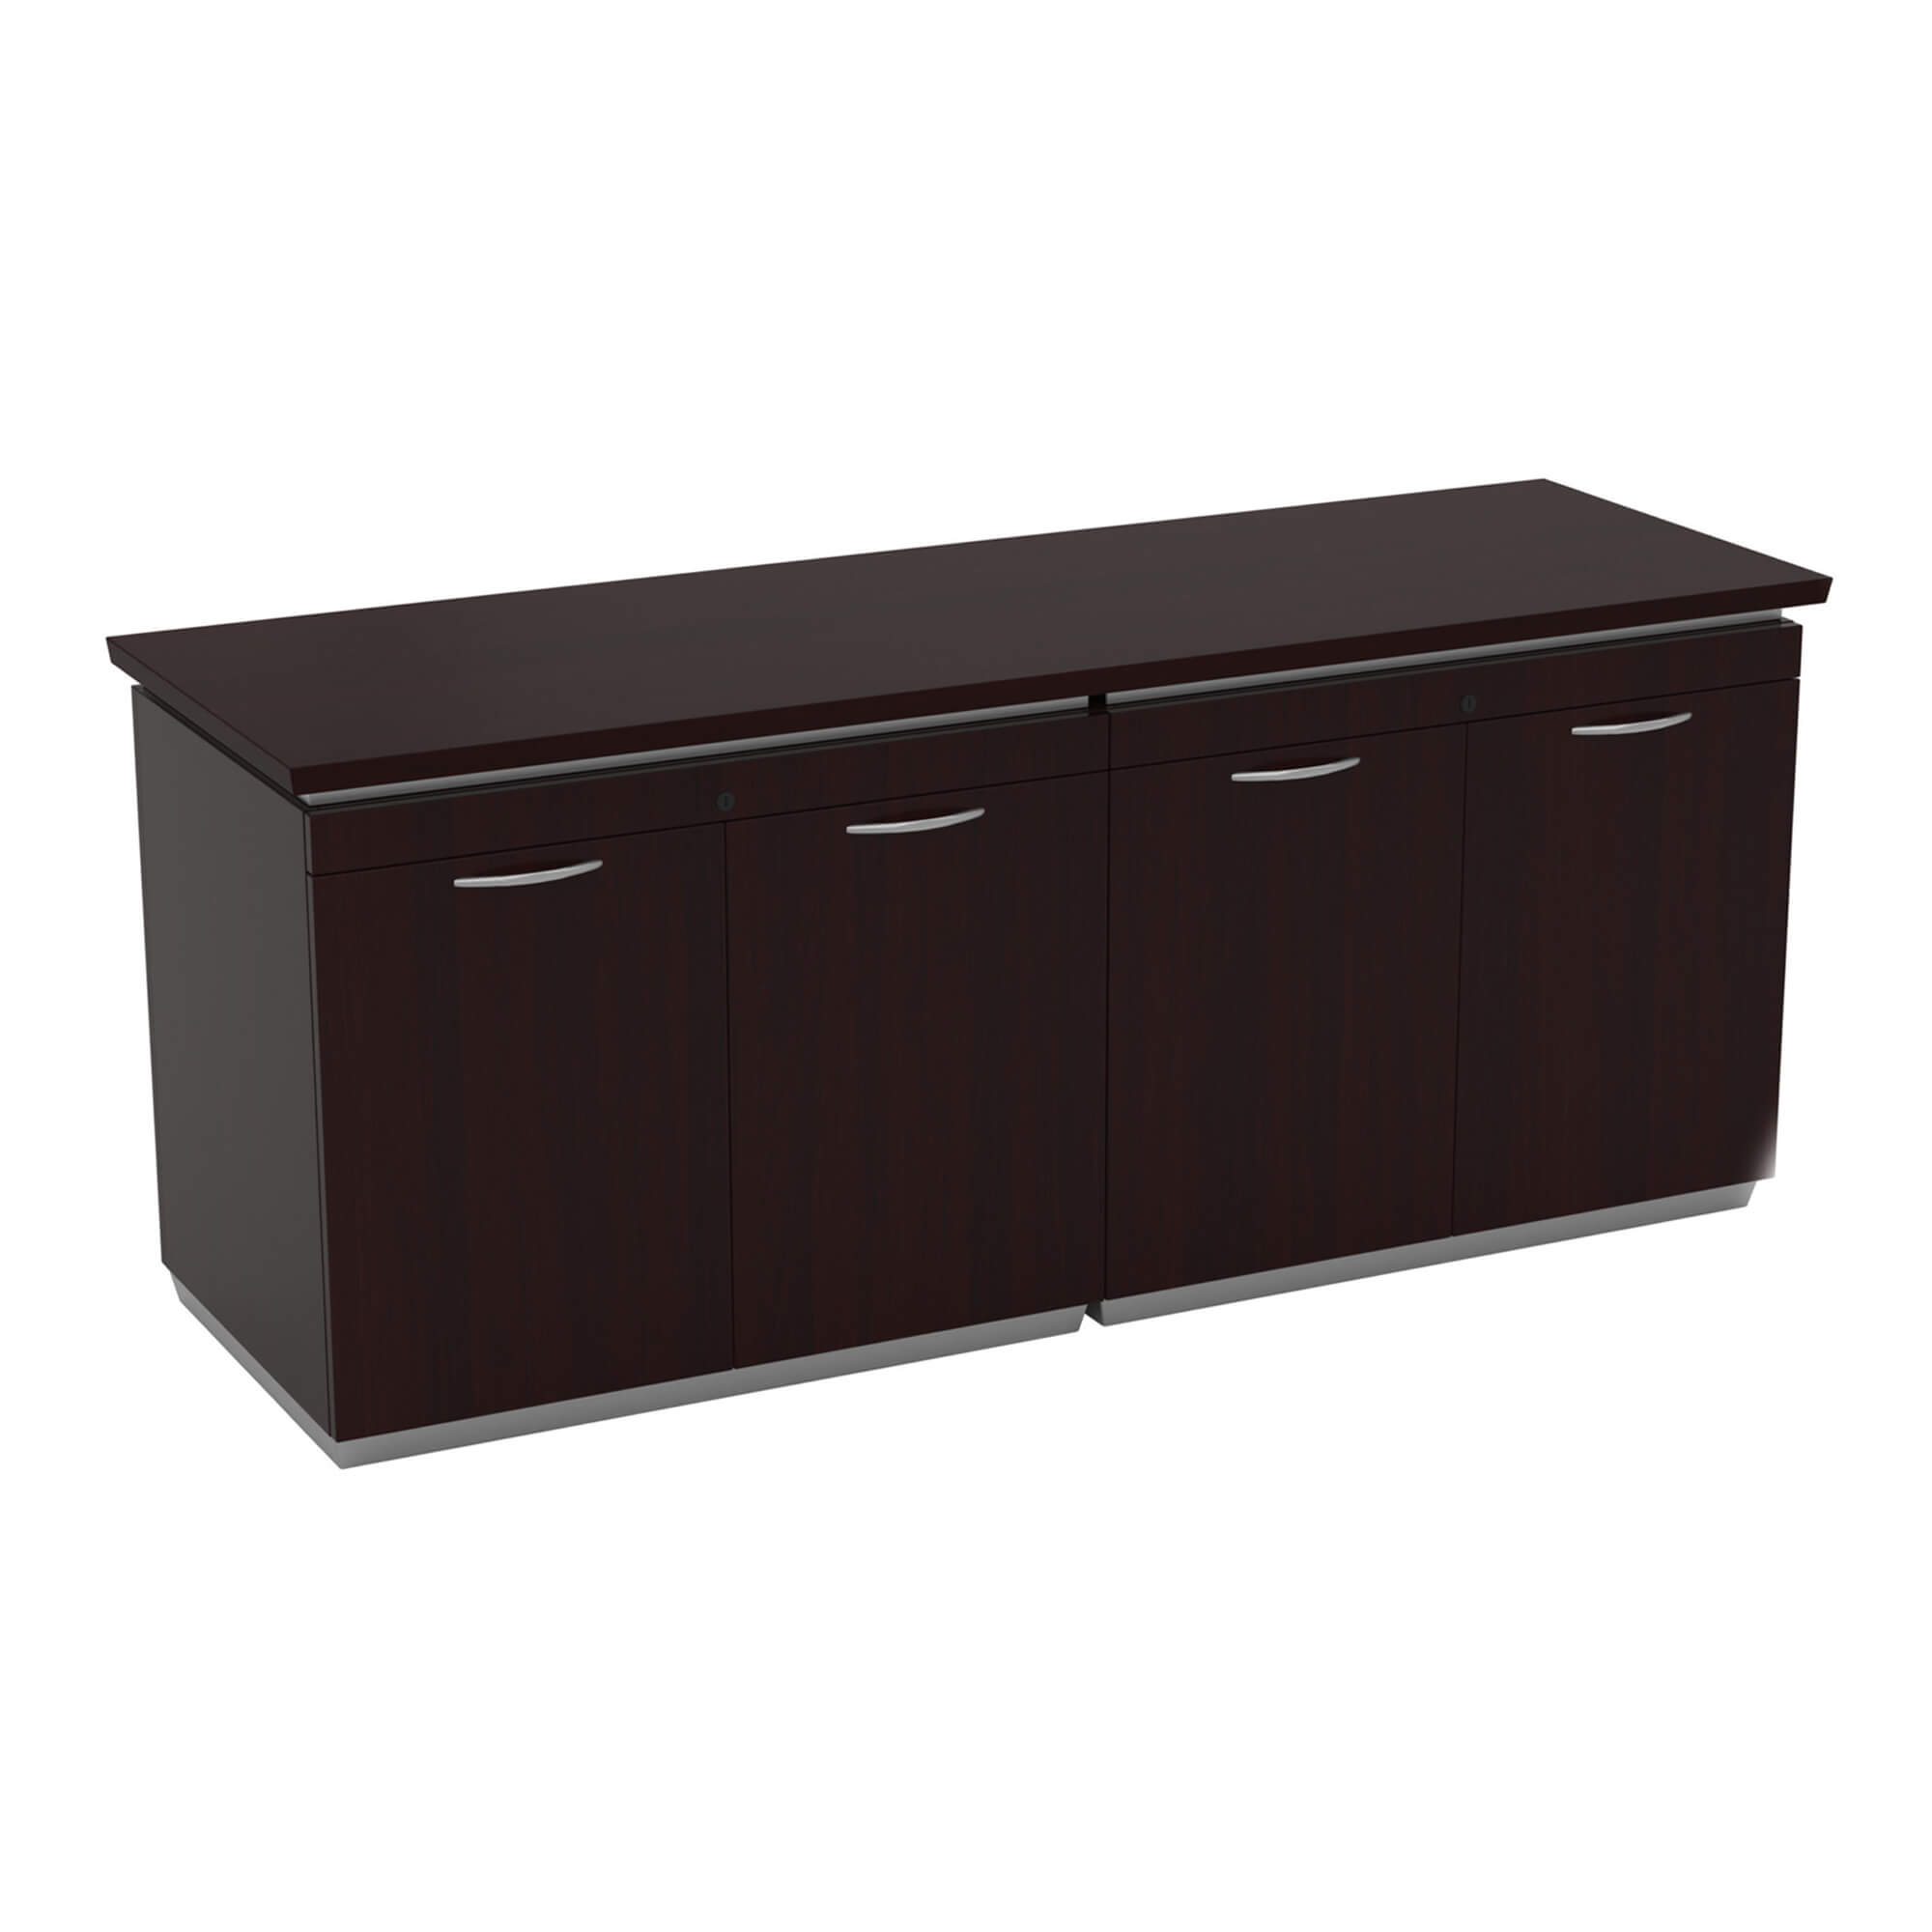 Conference room storage and accessories CUB TUXDKR 207 PSO